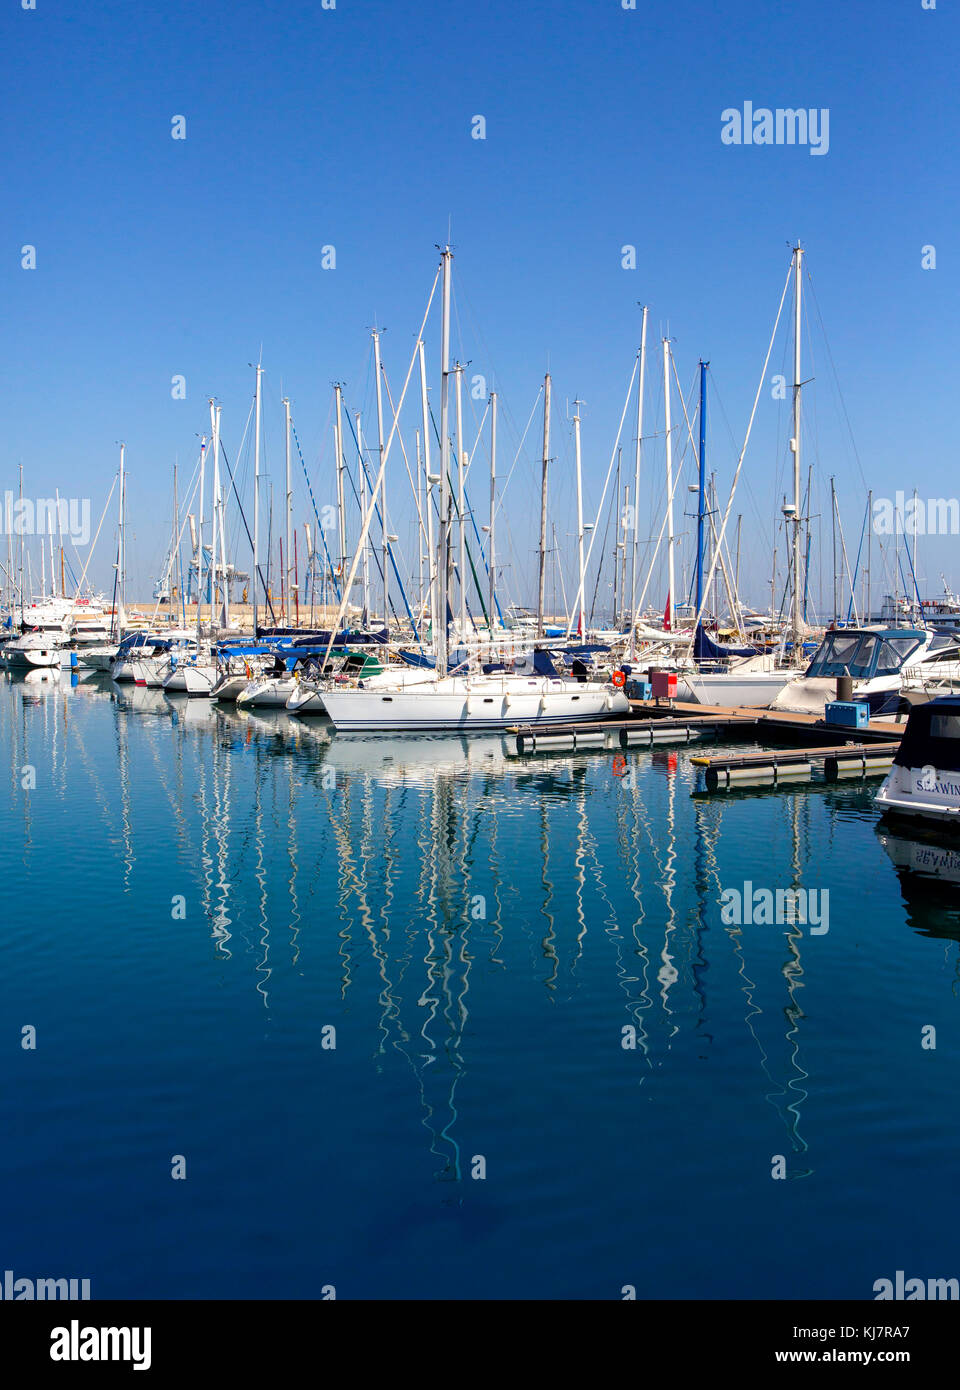 Boats in a harbor, Larnaca, Cyprus Stock Photo